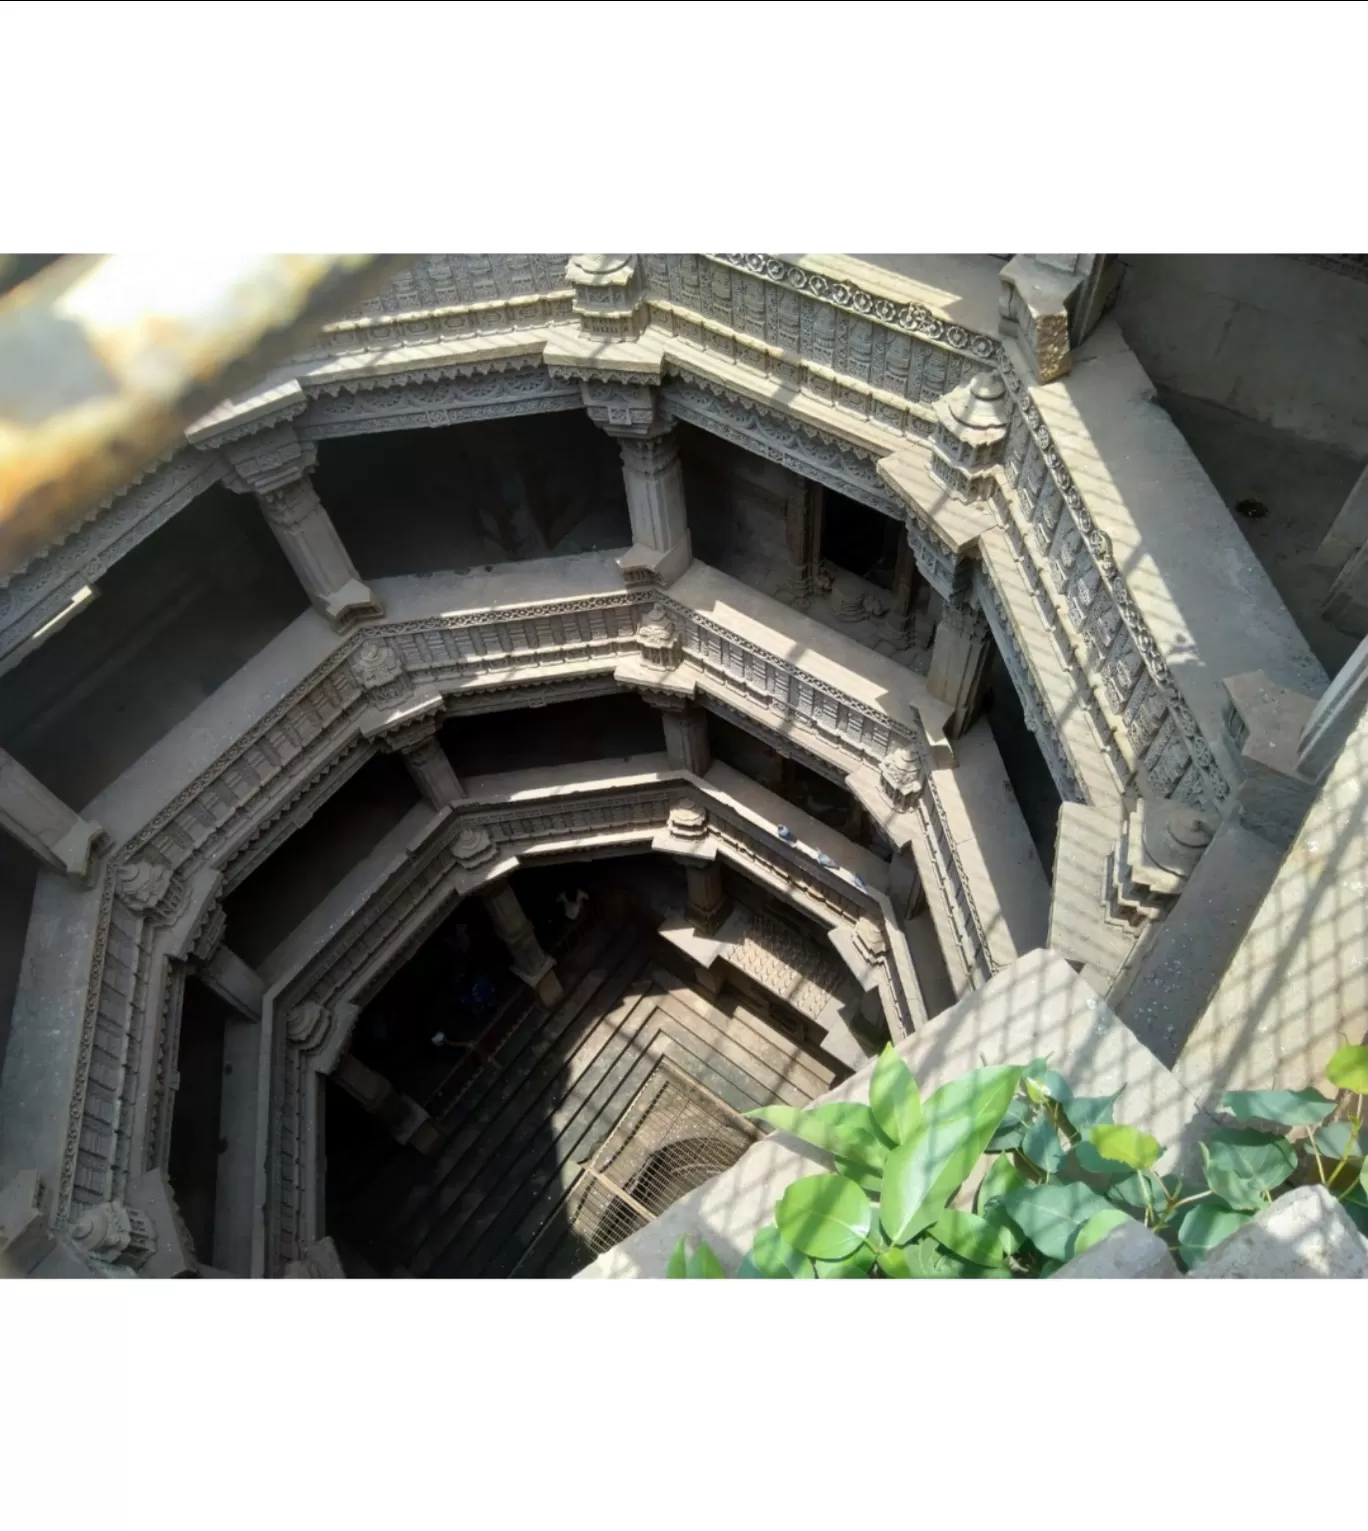 Photo of The Adalaj Stepwell By Vedant Rajput